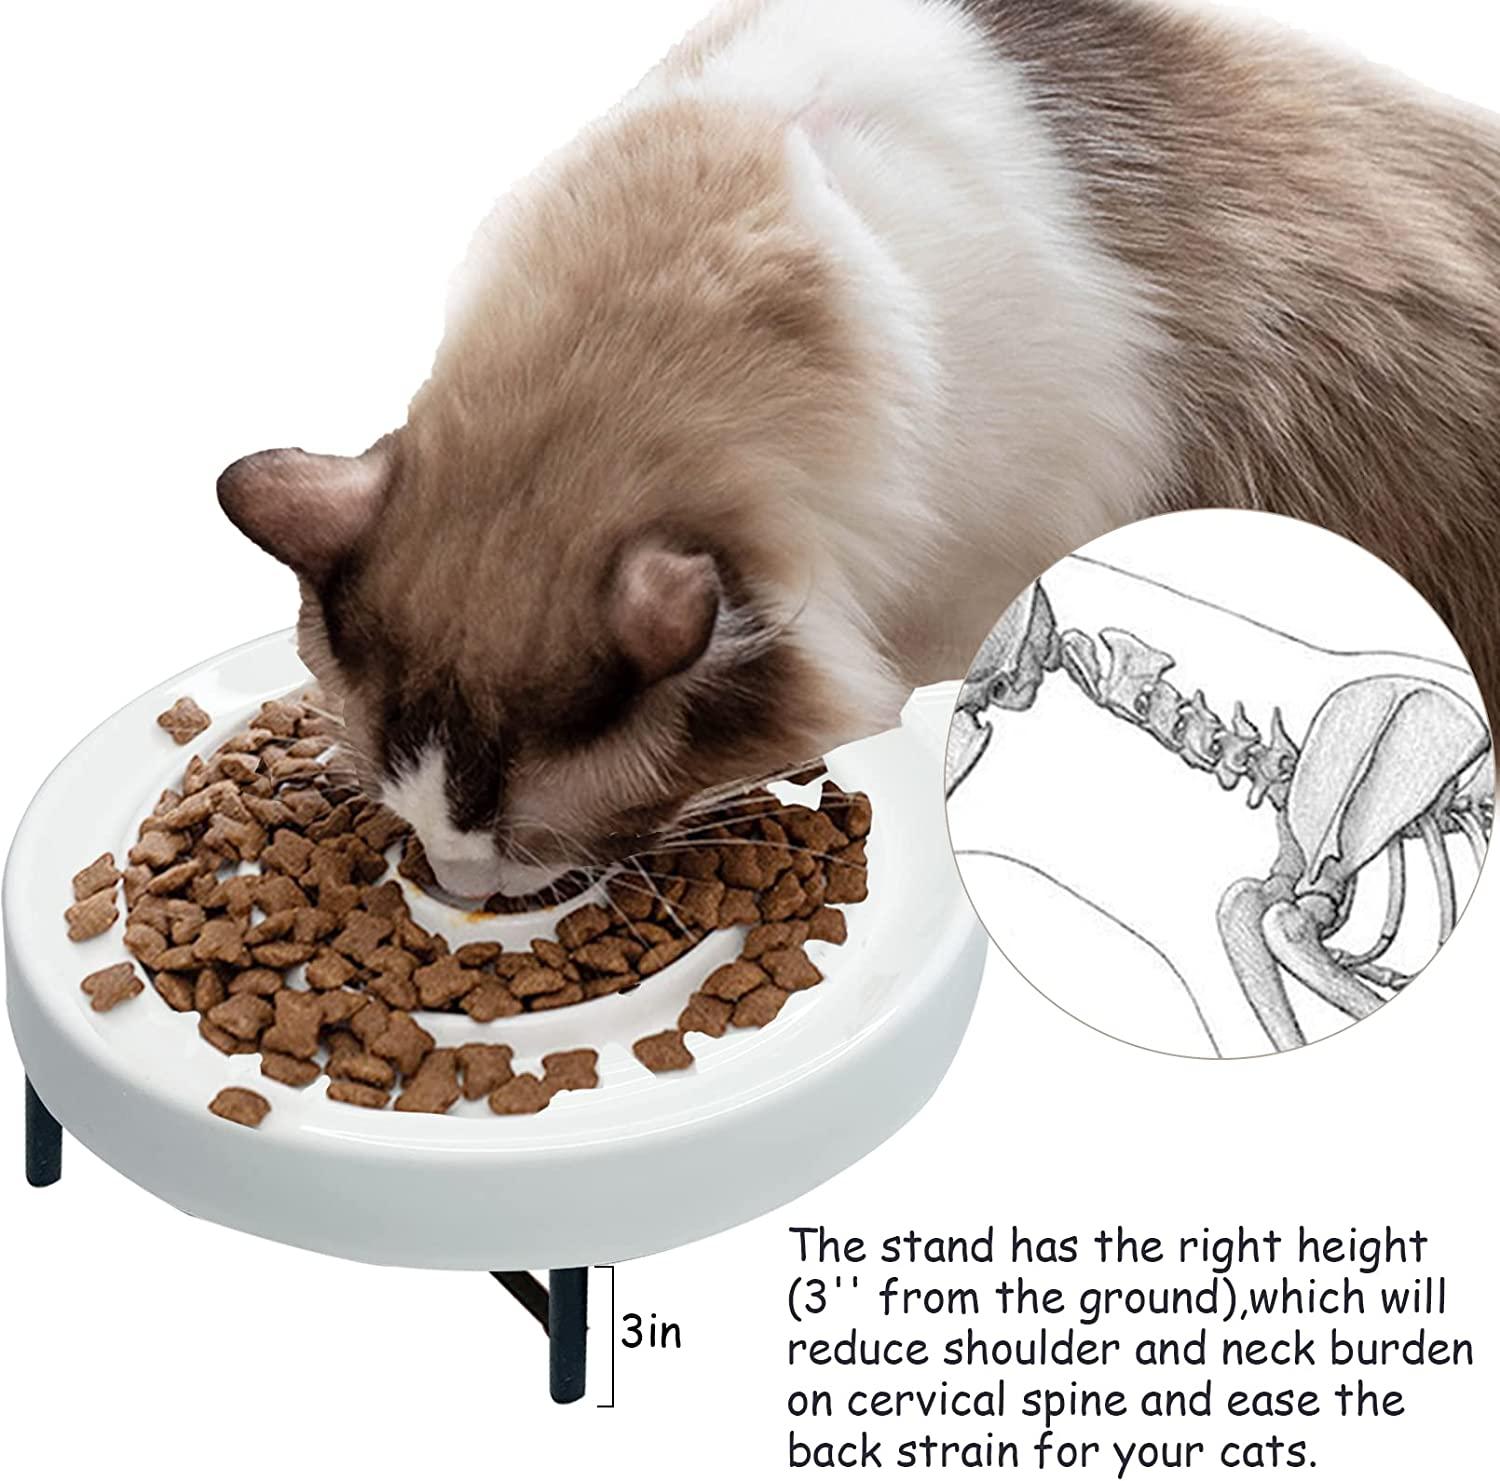 The Best Way to Maintain your Kitten's Digestive and Overall Health is an Elevated  Cat Feeder - Modern Cat